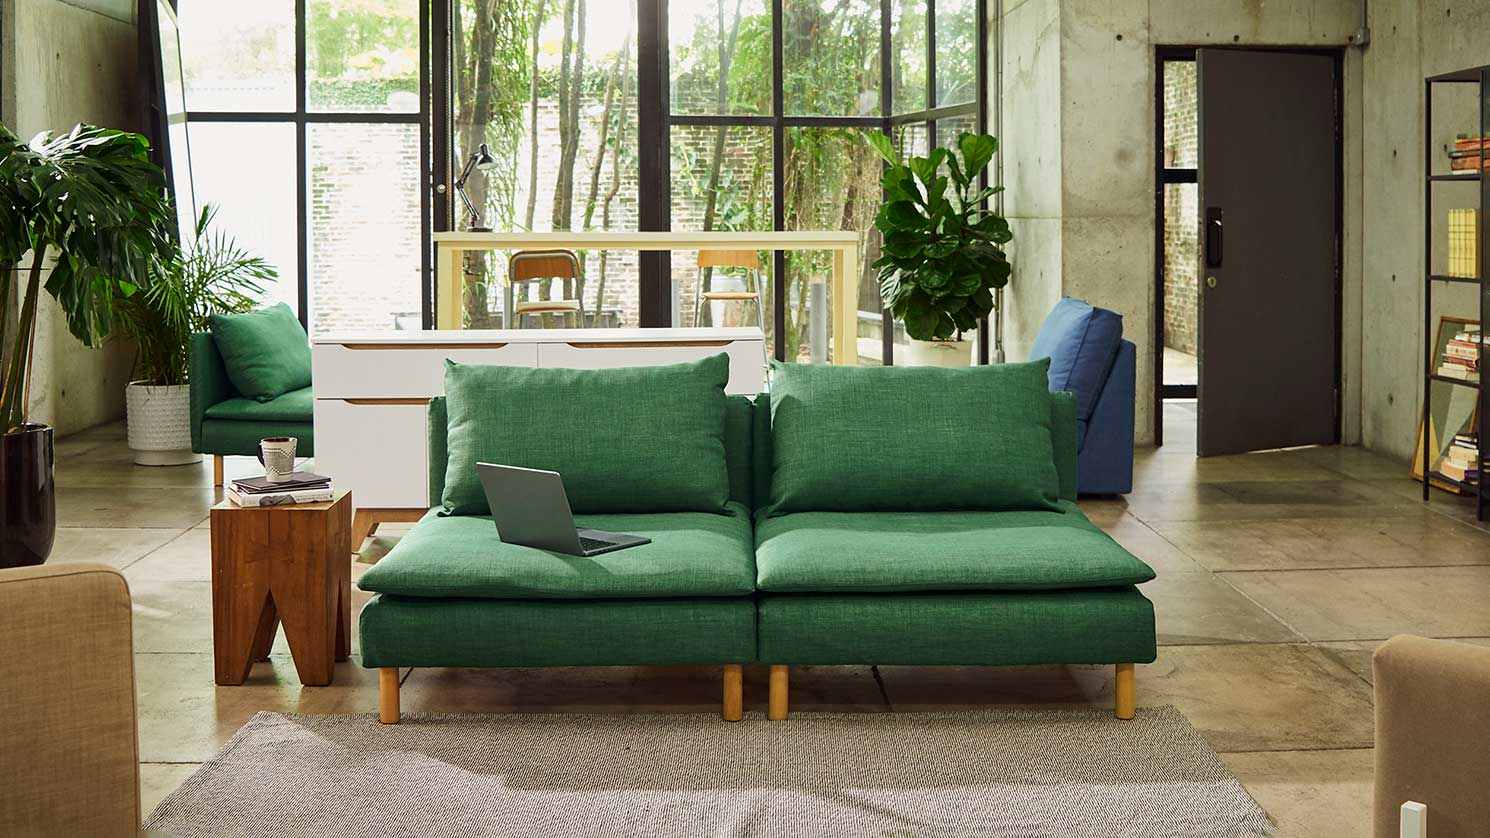 A basil green Textured Weave cover on a two seat IKEA Soderhamn section, in an industrial living room